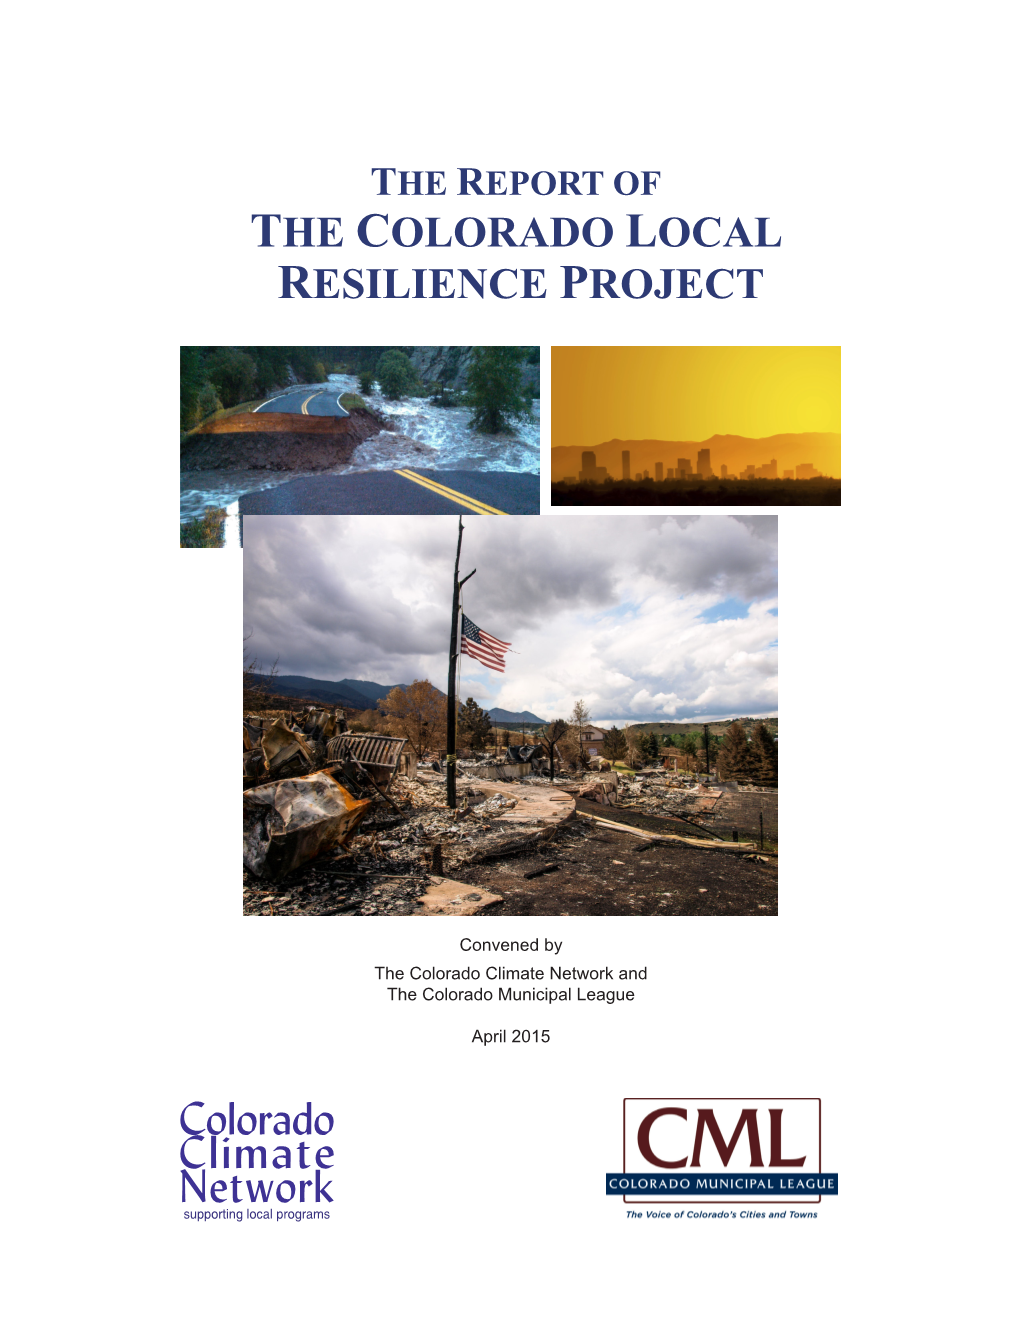 Report of the Colorado Local Resilience Project